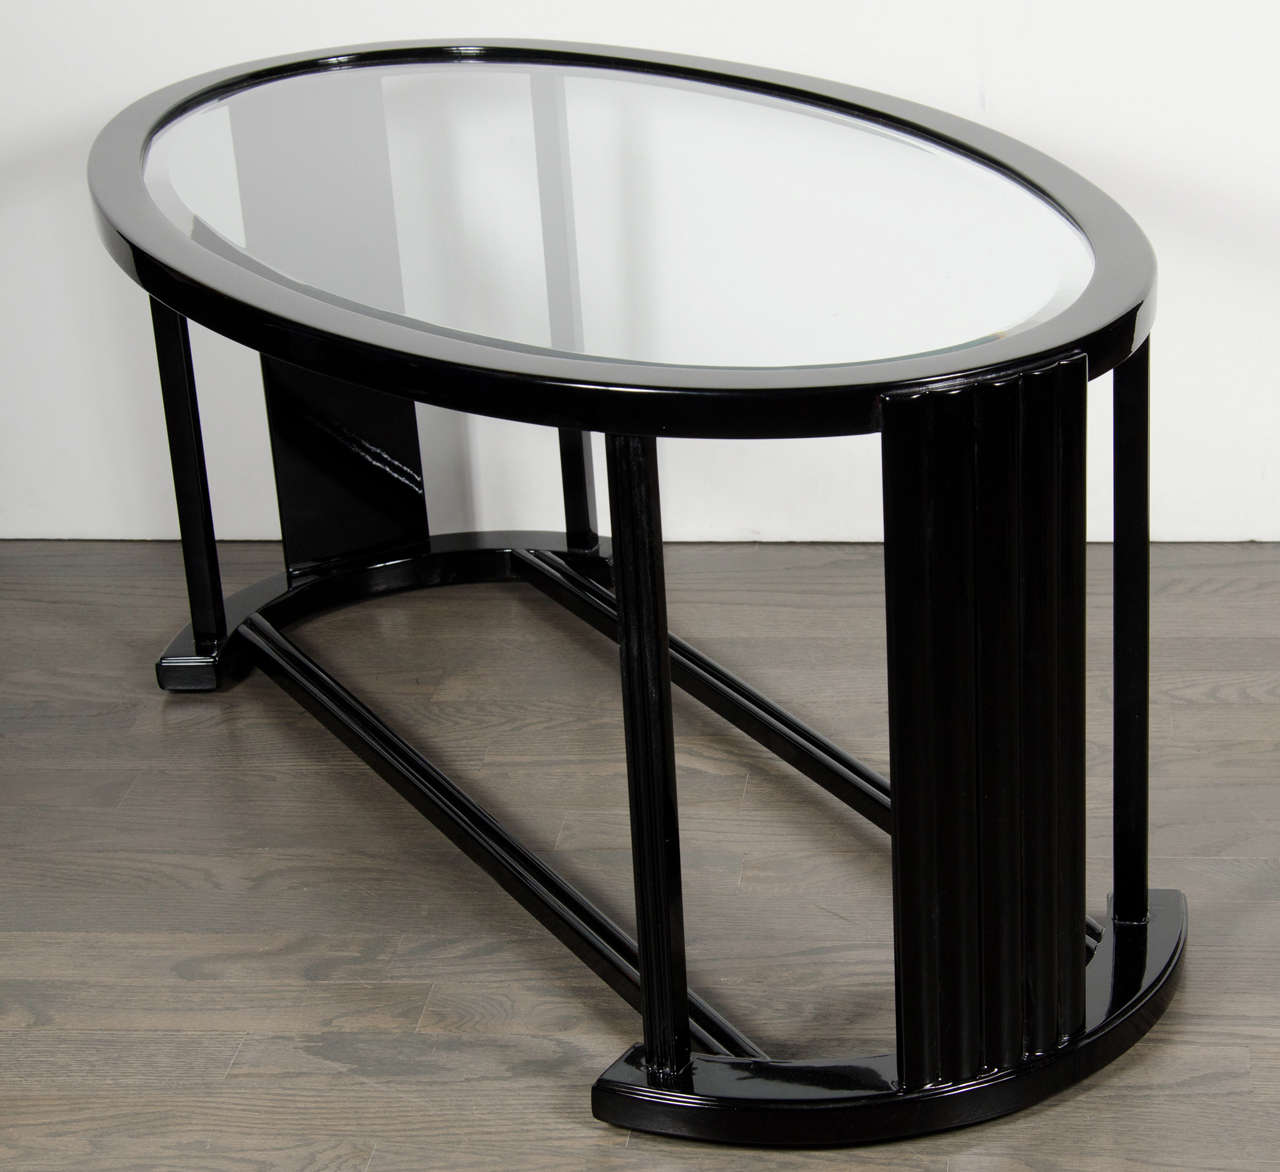 French Art Deco Bauhaus Influence Ovoid Cocktail Table